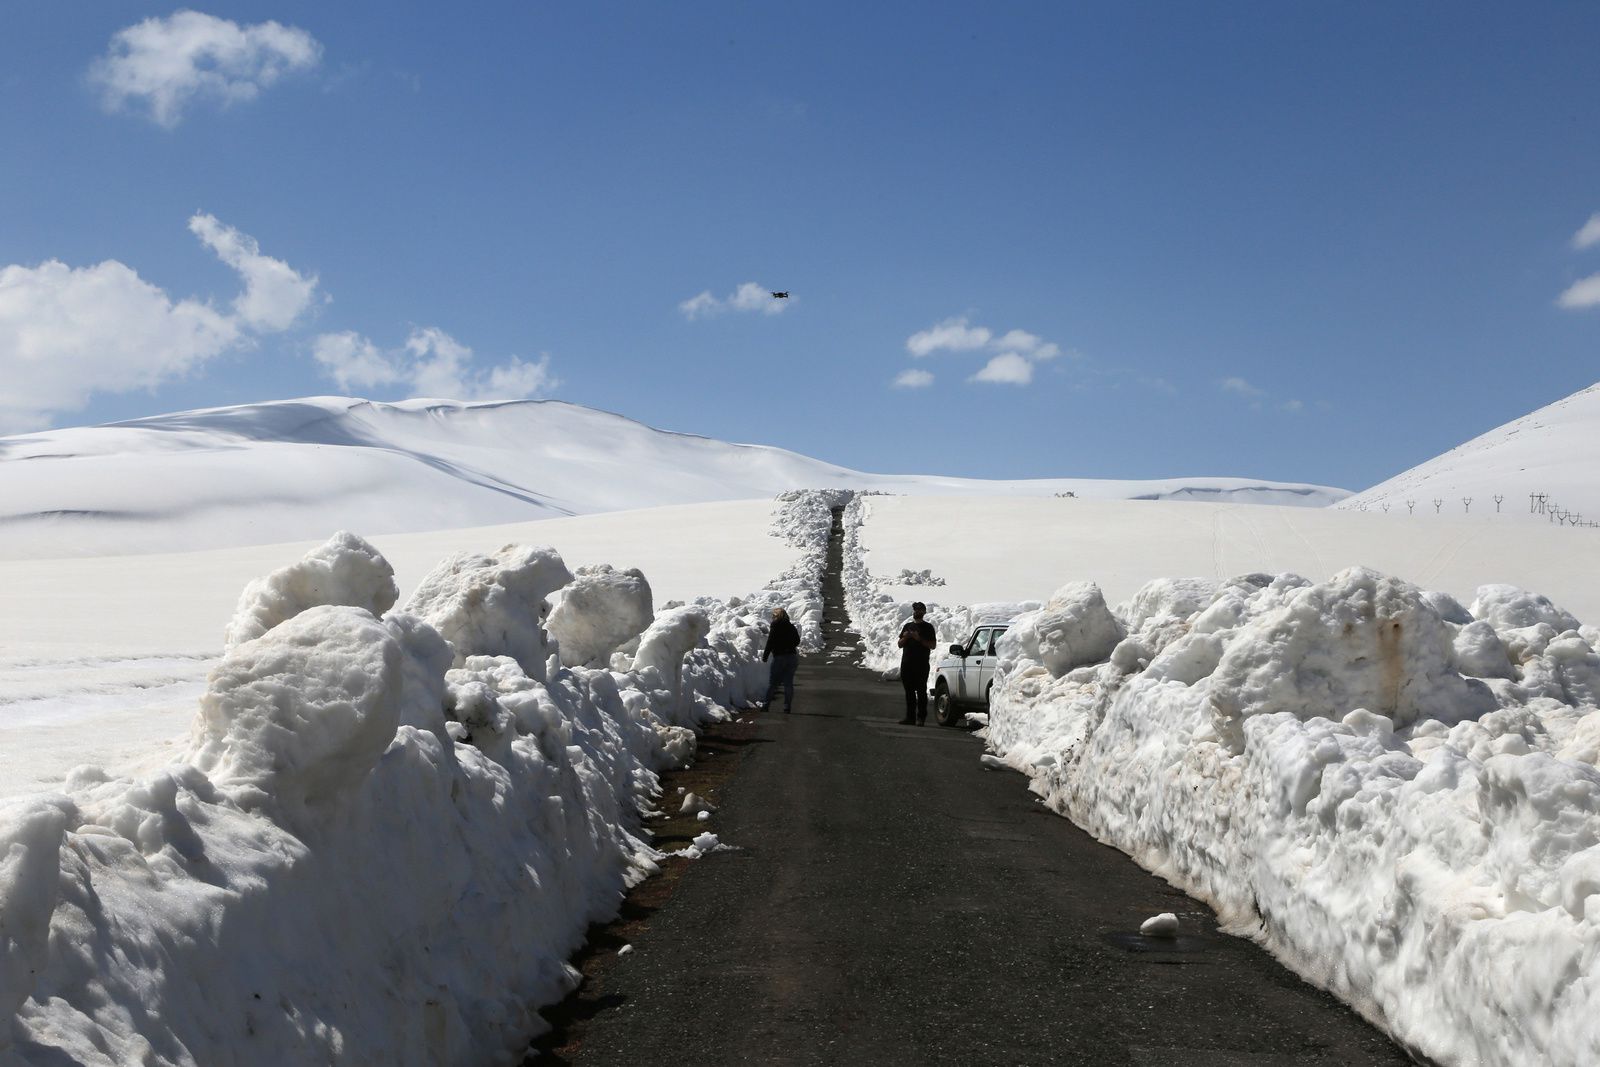 Armenia - Ascent to the Aragats ... brutal stoppage of our progress - photo © Bernard Duyck 2019